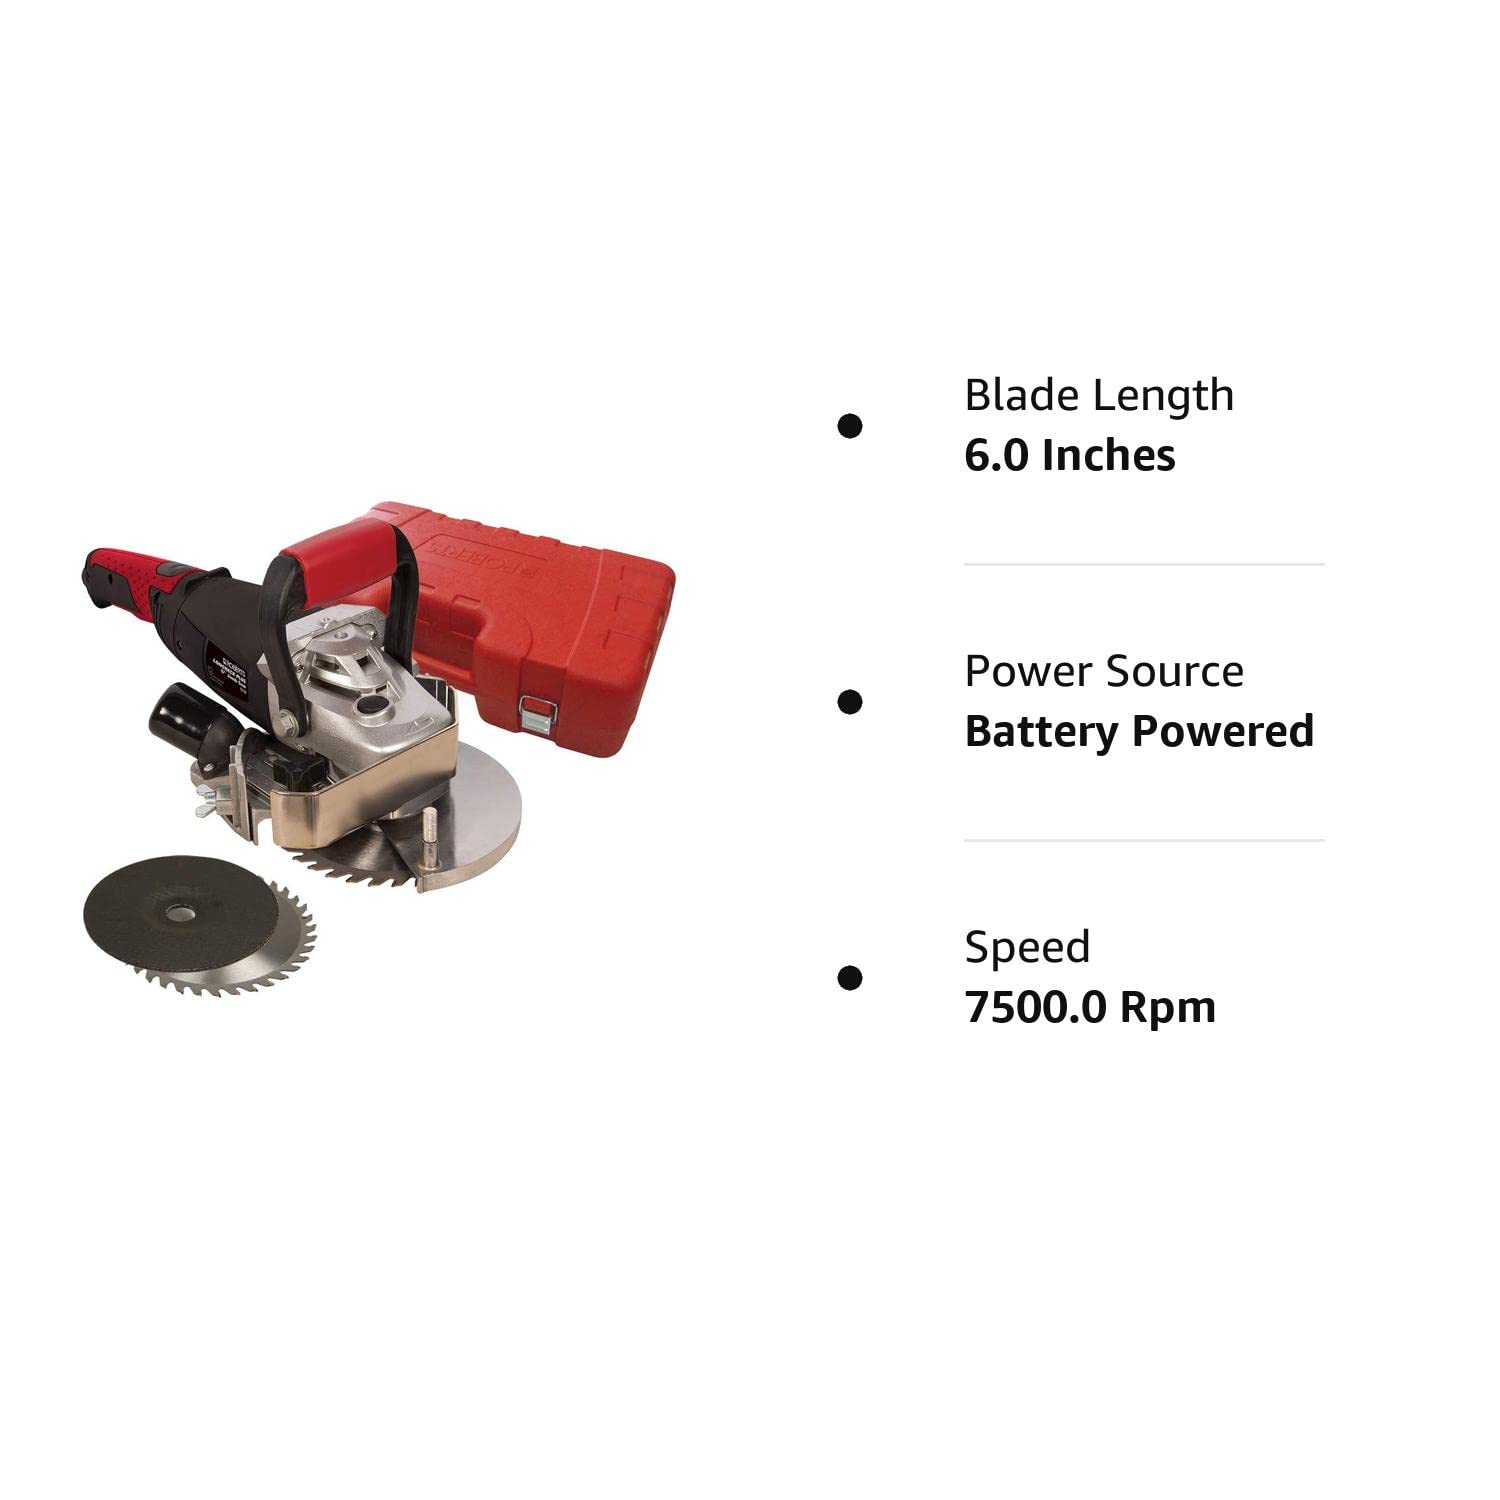 NEW QEP ROBERTS 10-56 ELECTRIC 6" LONGNECK JAMB SAW KIT WITH CASE - 5